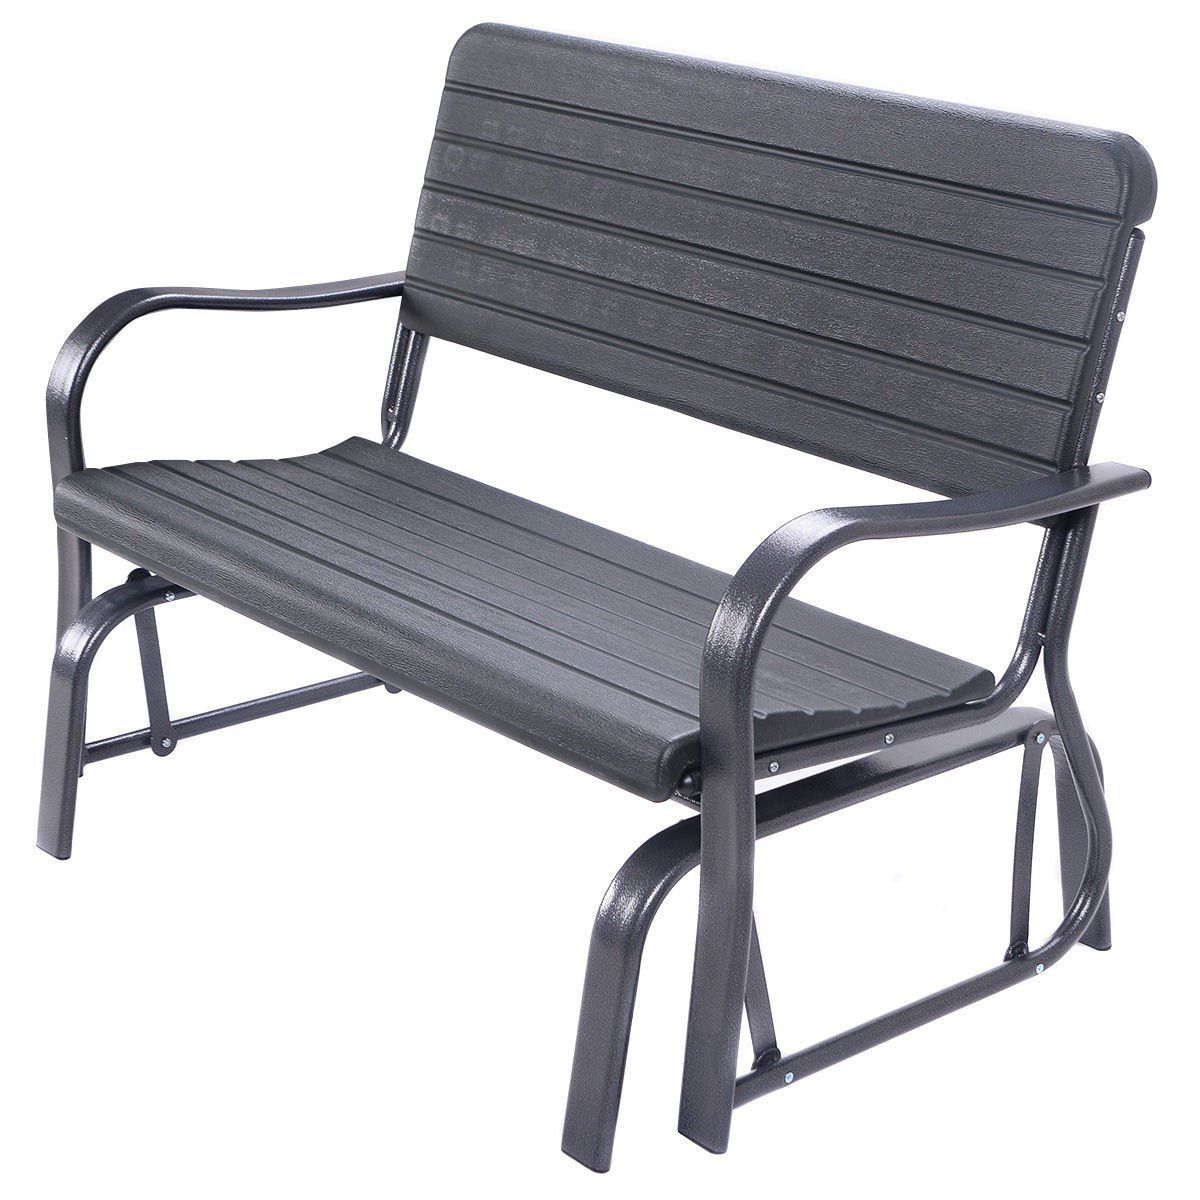 Trendy Loveseat Glider Benches With Regard To Buy Outdoor Patio Swing Porch Rocker Glider Bench Loveseat (View 14 of 30)